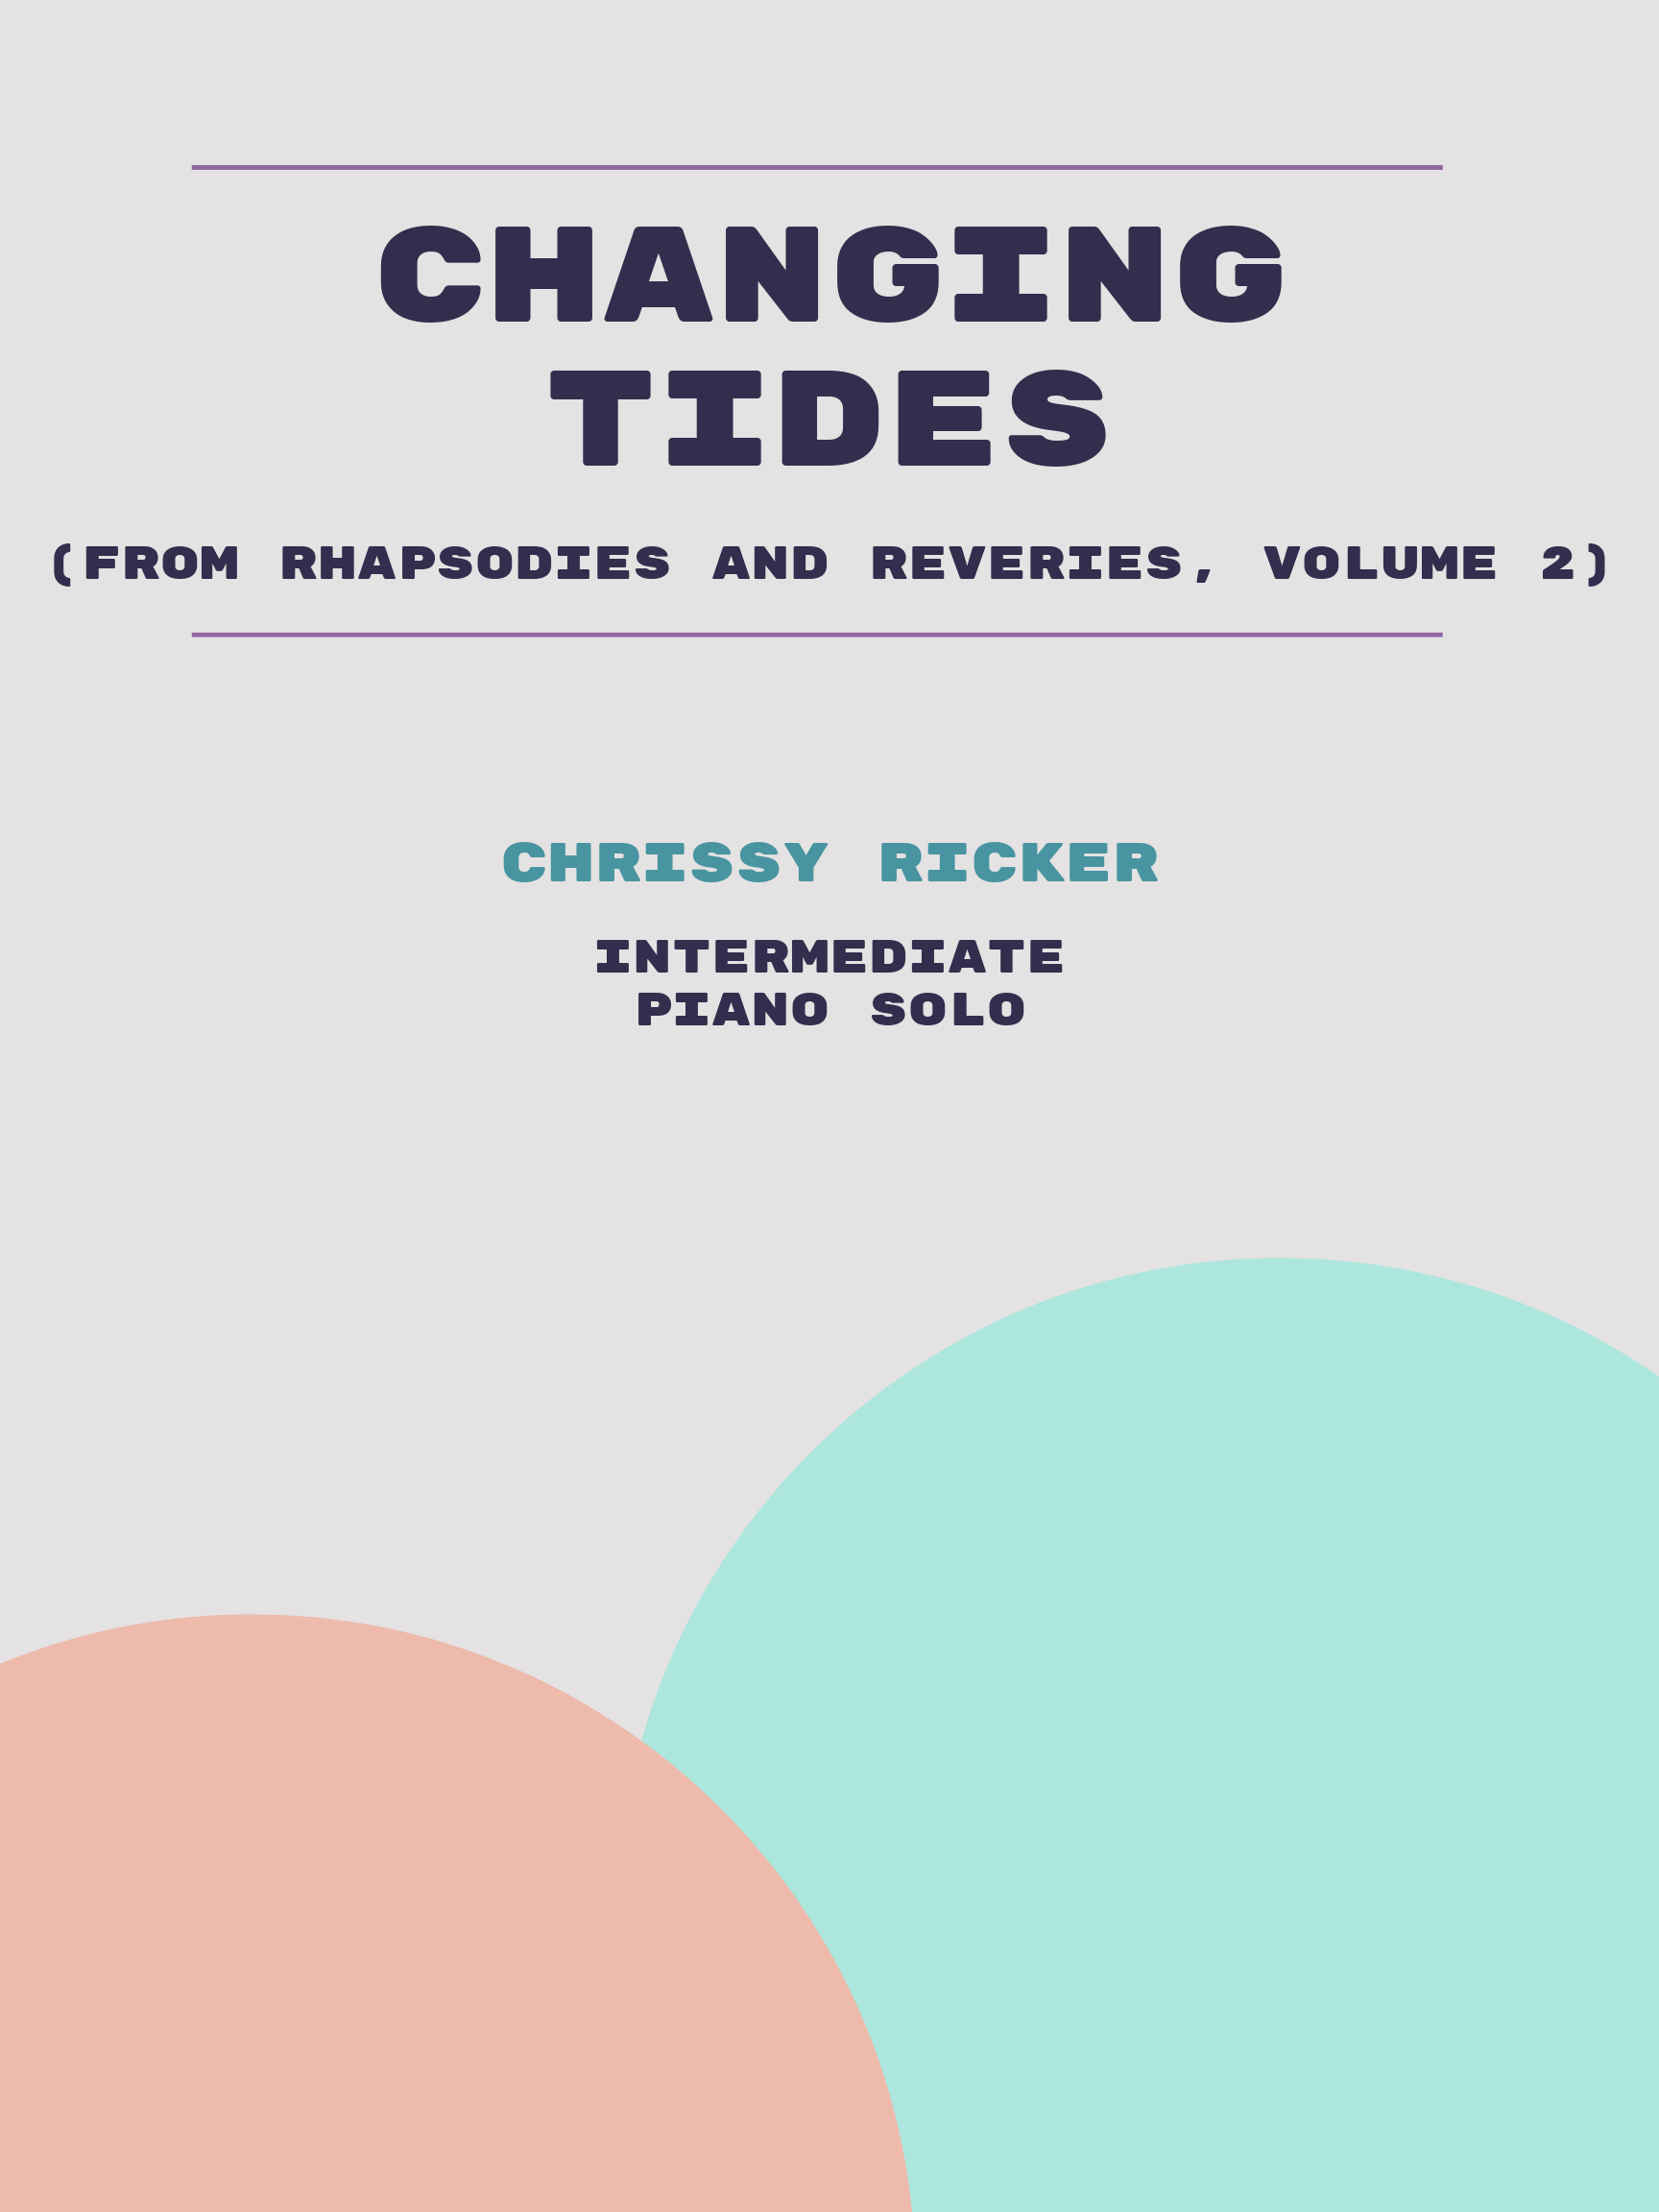 Changing Tides by Chrissy Ricker